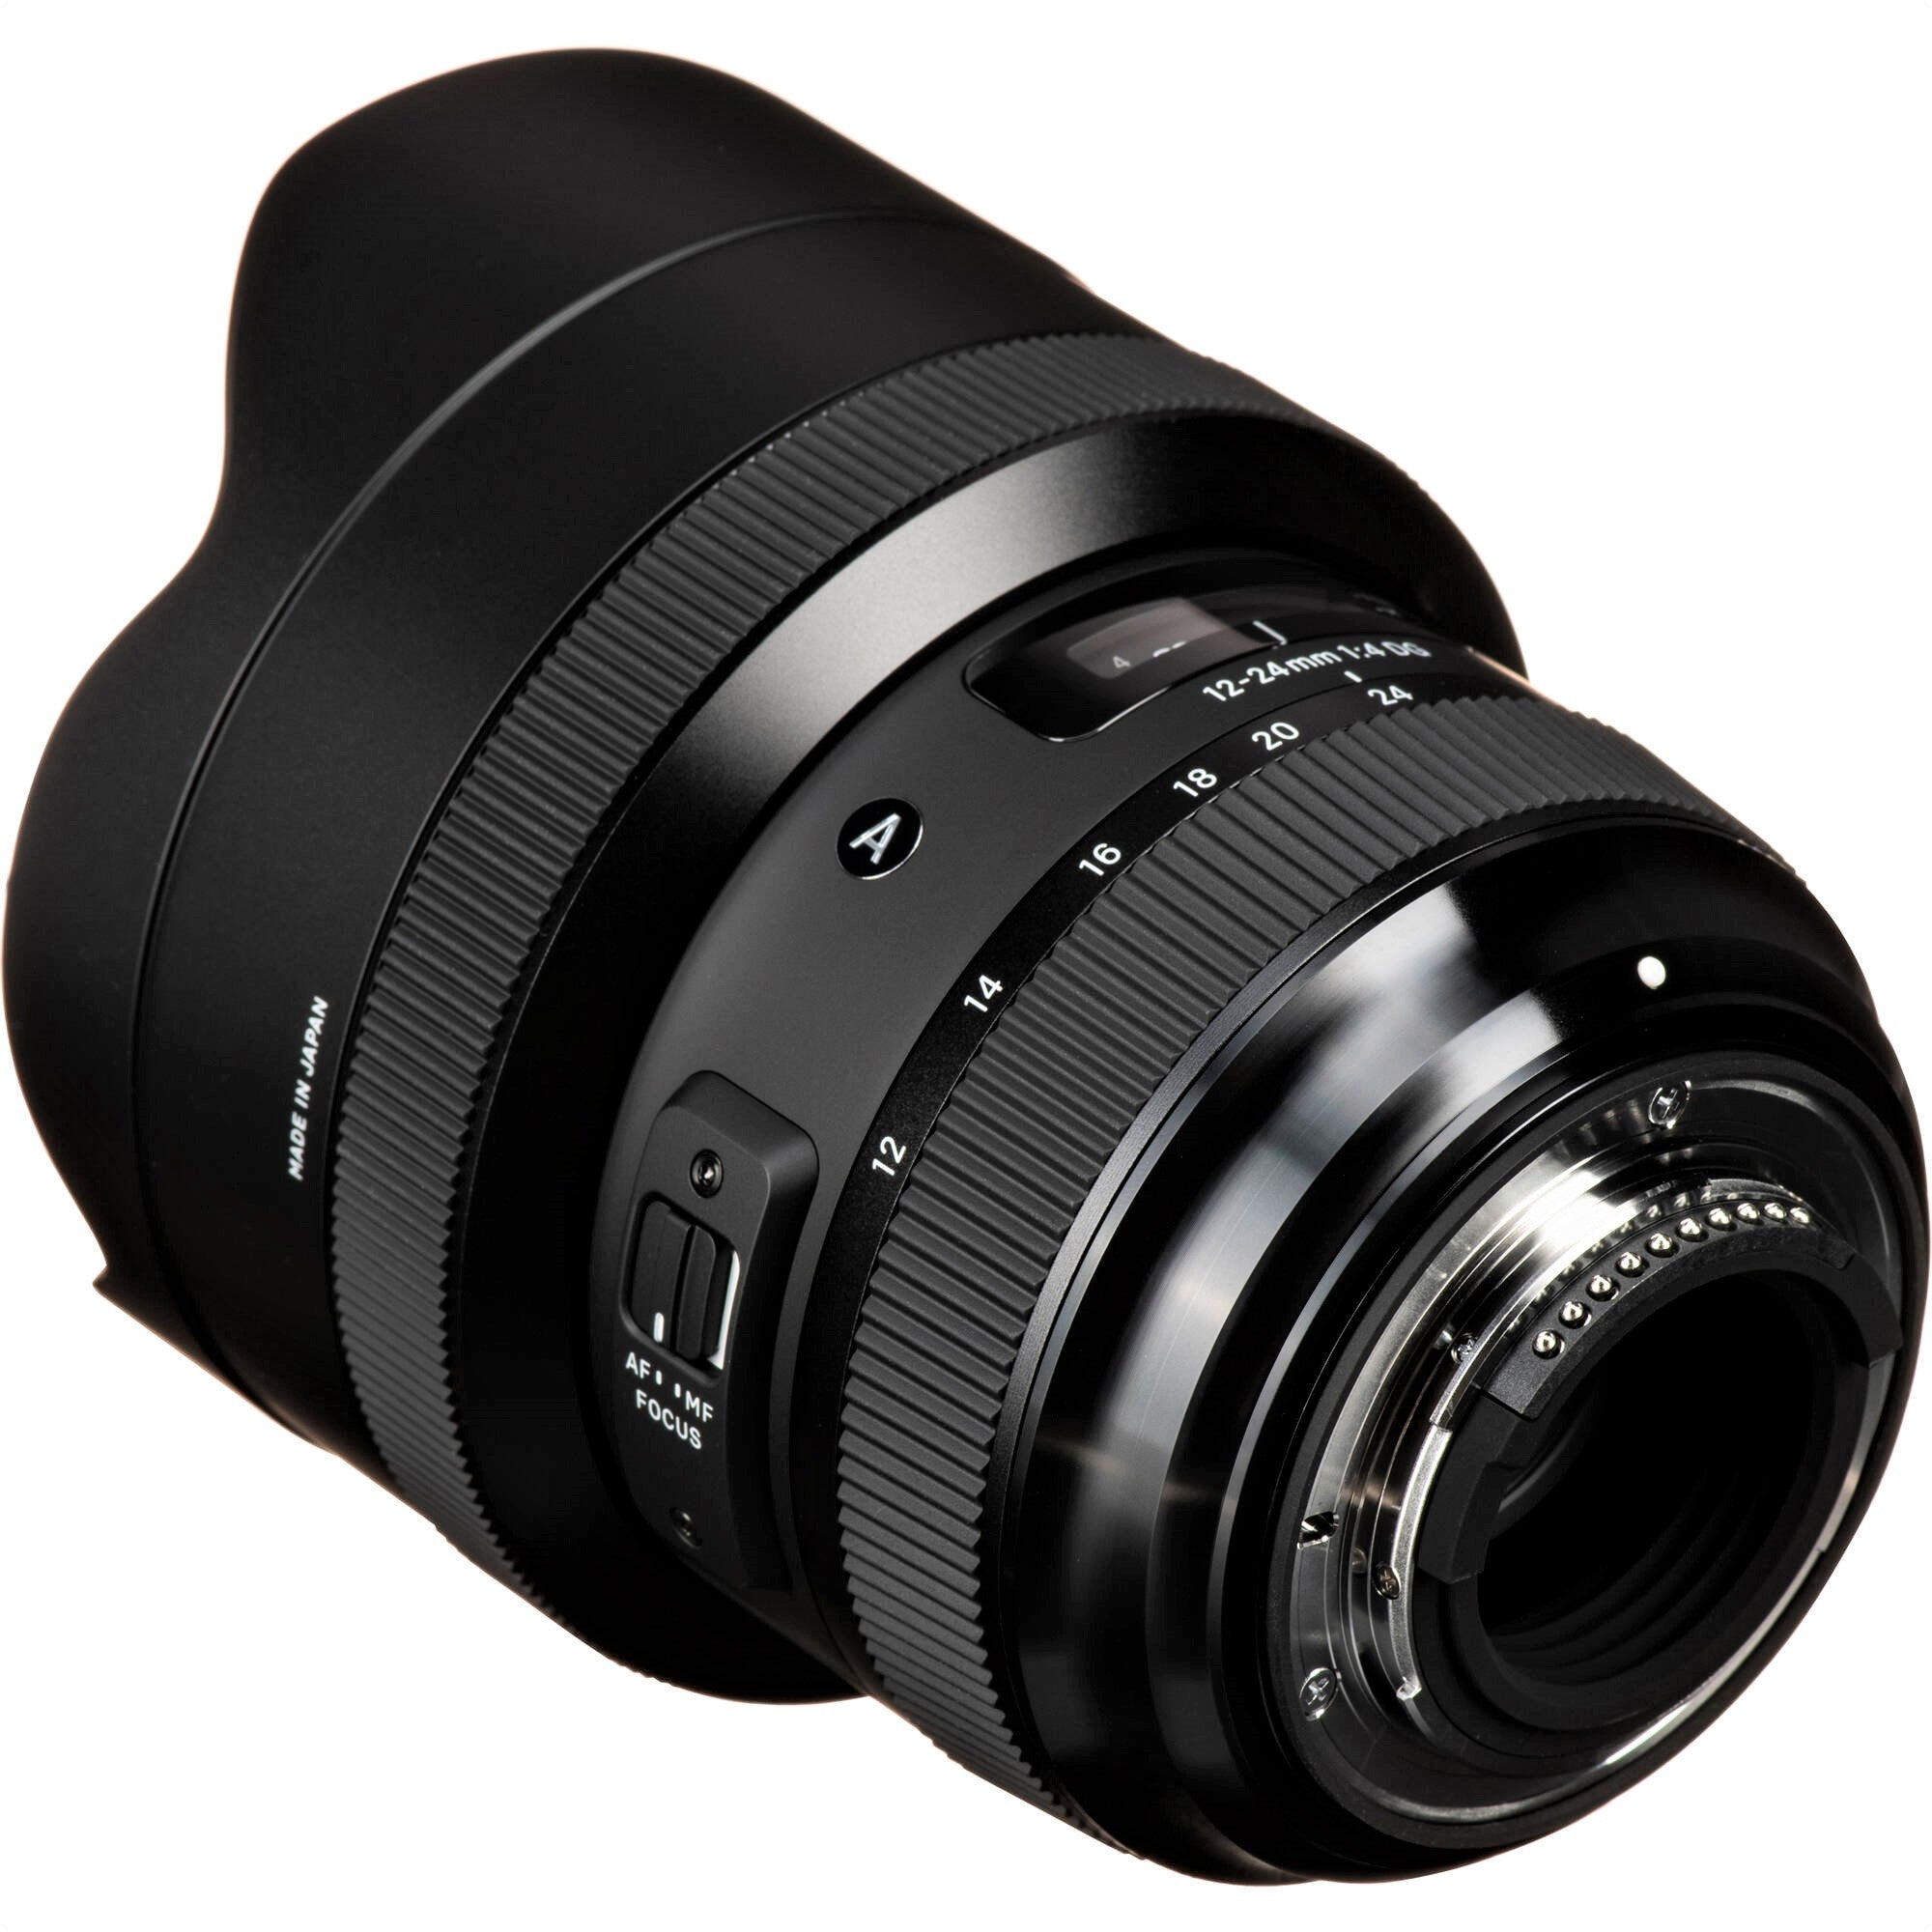 Sigma 12-24mm F4.0 DG HSM Art Lens for Nikon F in a Back-Side View